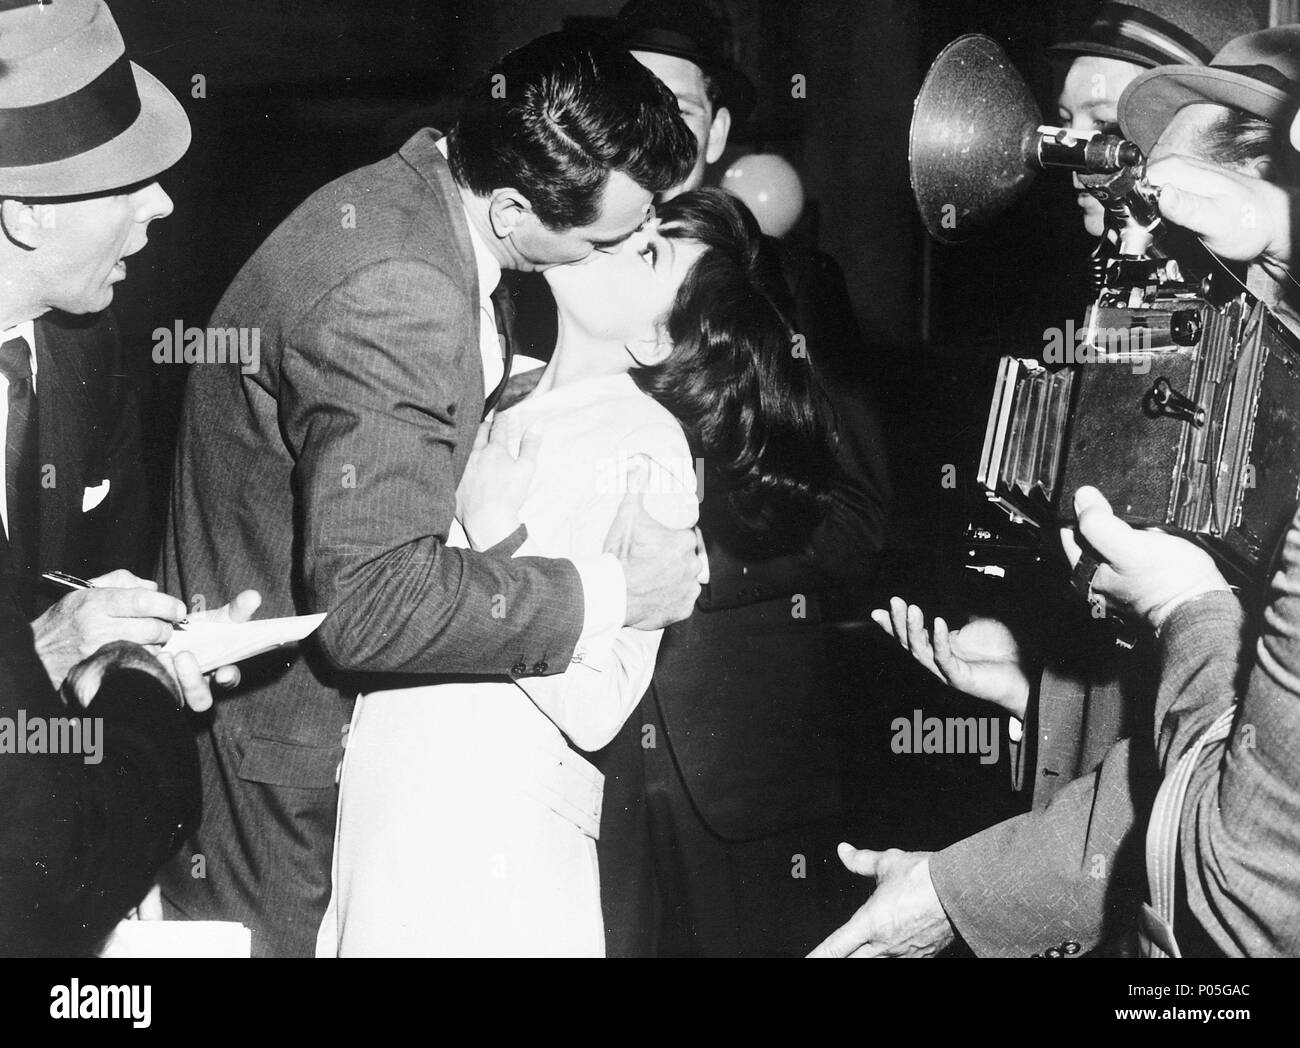 Original Film Title: BLINDFOLD.  English Title: BLINDFOLD.  Film Director: PHILIP DUNNE.  Year: 1965.  Stars: ROCK HUDSON; CLAUDIA CARDINALE. Credit: UNIVERSAL PICTURES / Album Stock Photo